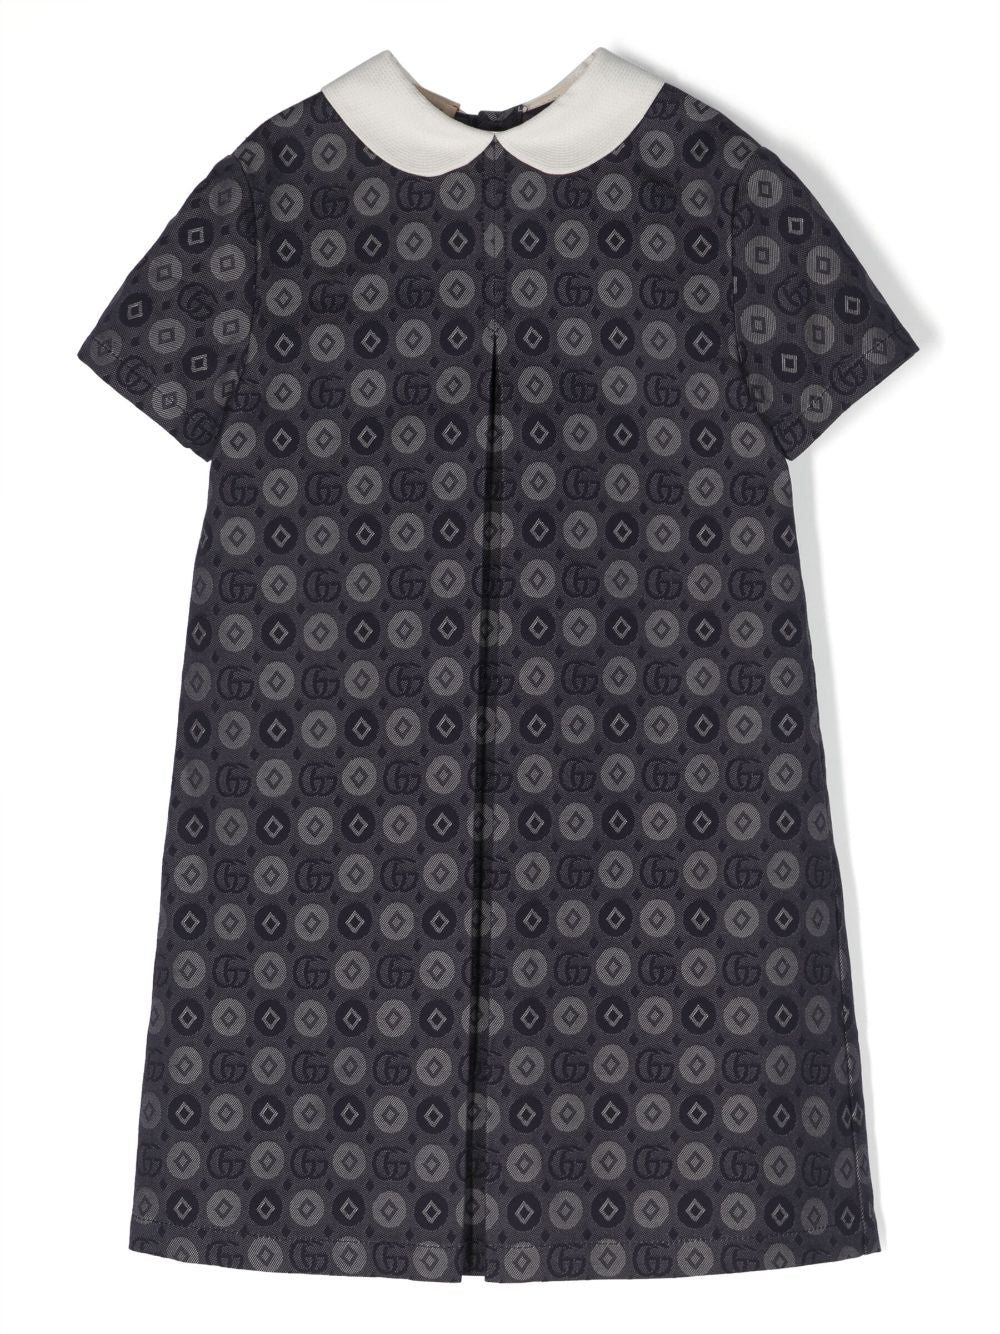 Gray dress for girls with all-over logo